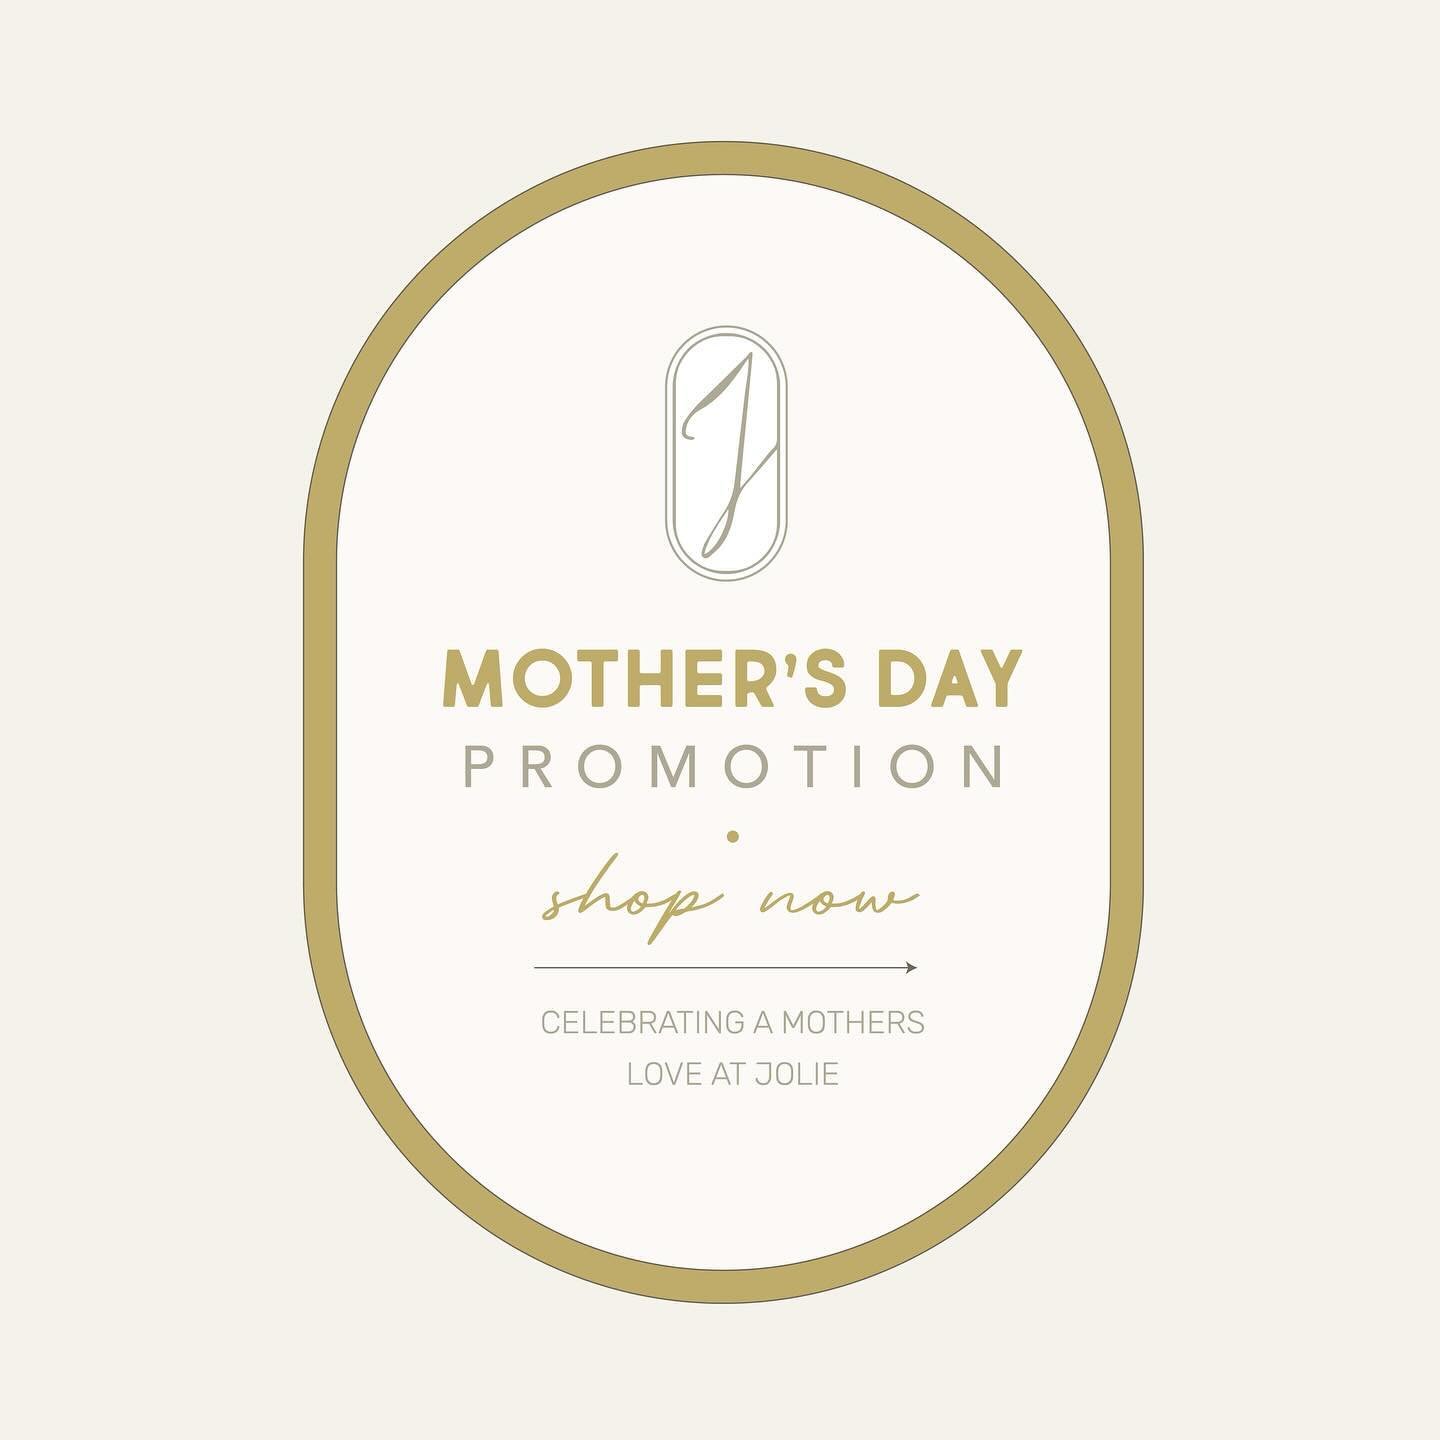 Give Mom the gift of relaxation and rejuvenation this Mother&rsquo;s Day!✨ Treat her to a day of pampering at Jolie because she deserves it all. 🌷✨ 

Indulge in our special promotions running from 5/6 to 5/15. 💖

⭐️ SOFWAVE (face &amp; neck) - $500